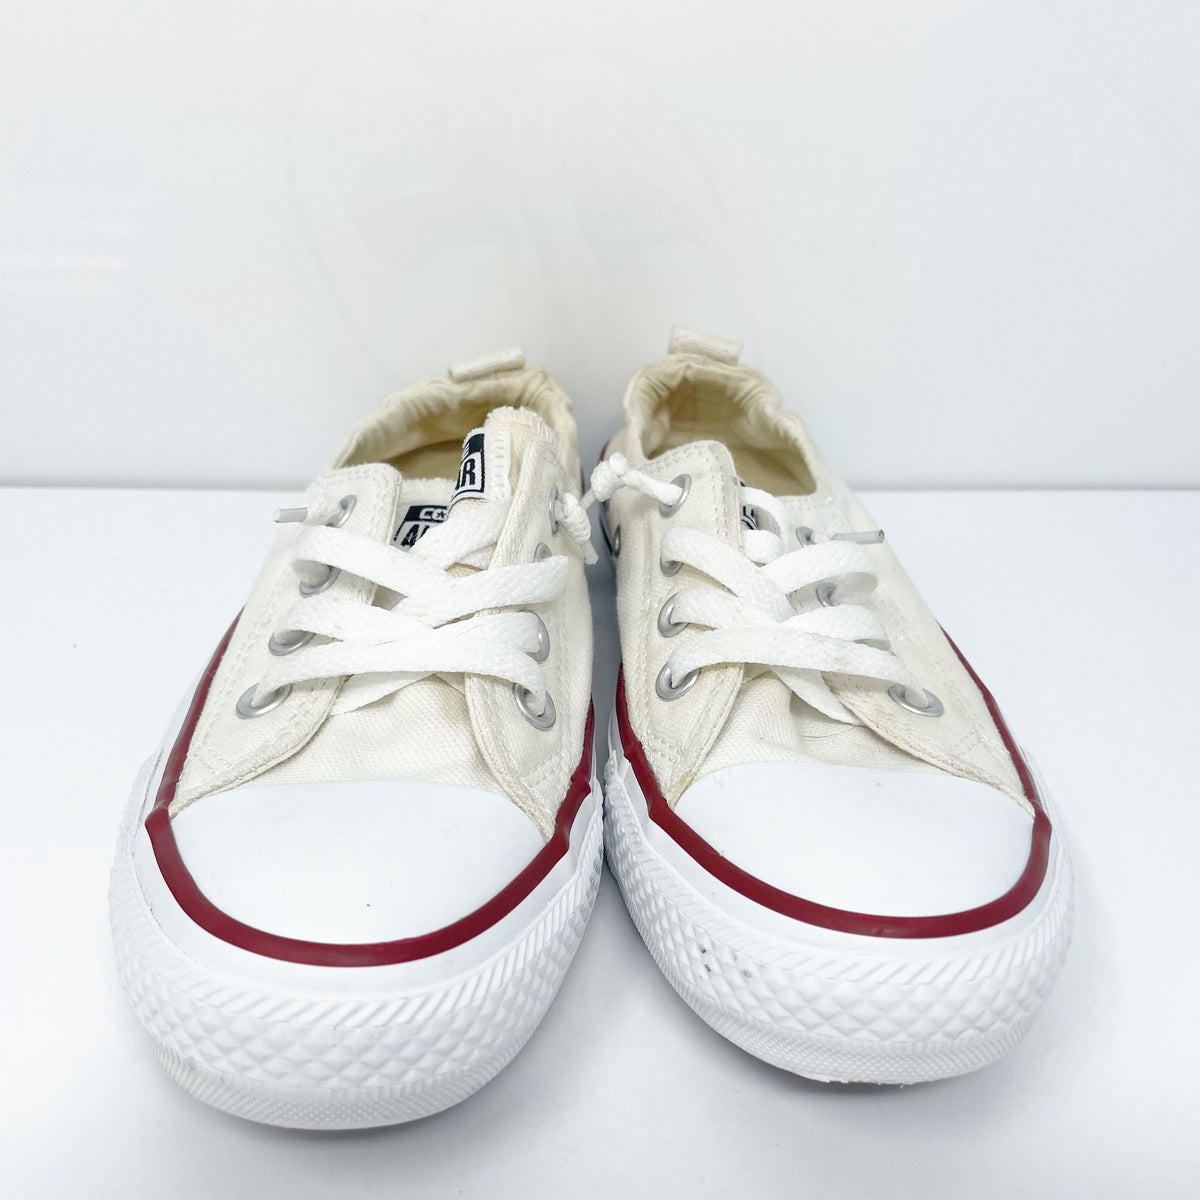 Converse Womens CT All Star Shoreline 537084F Ivory Casual Shoes Sneak ...